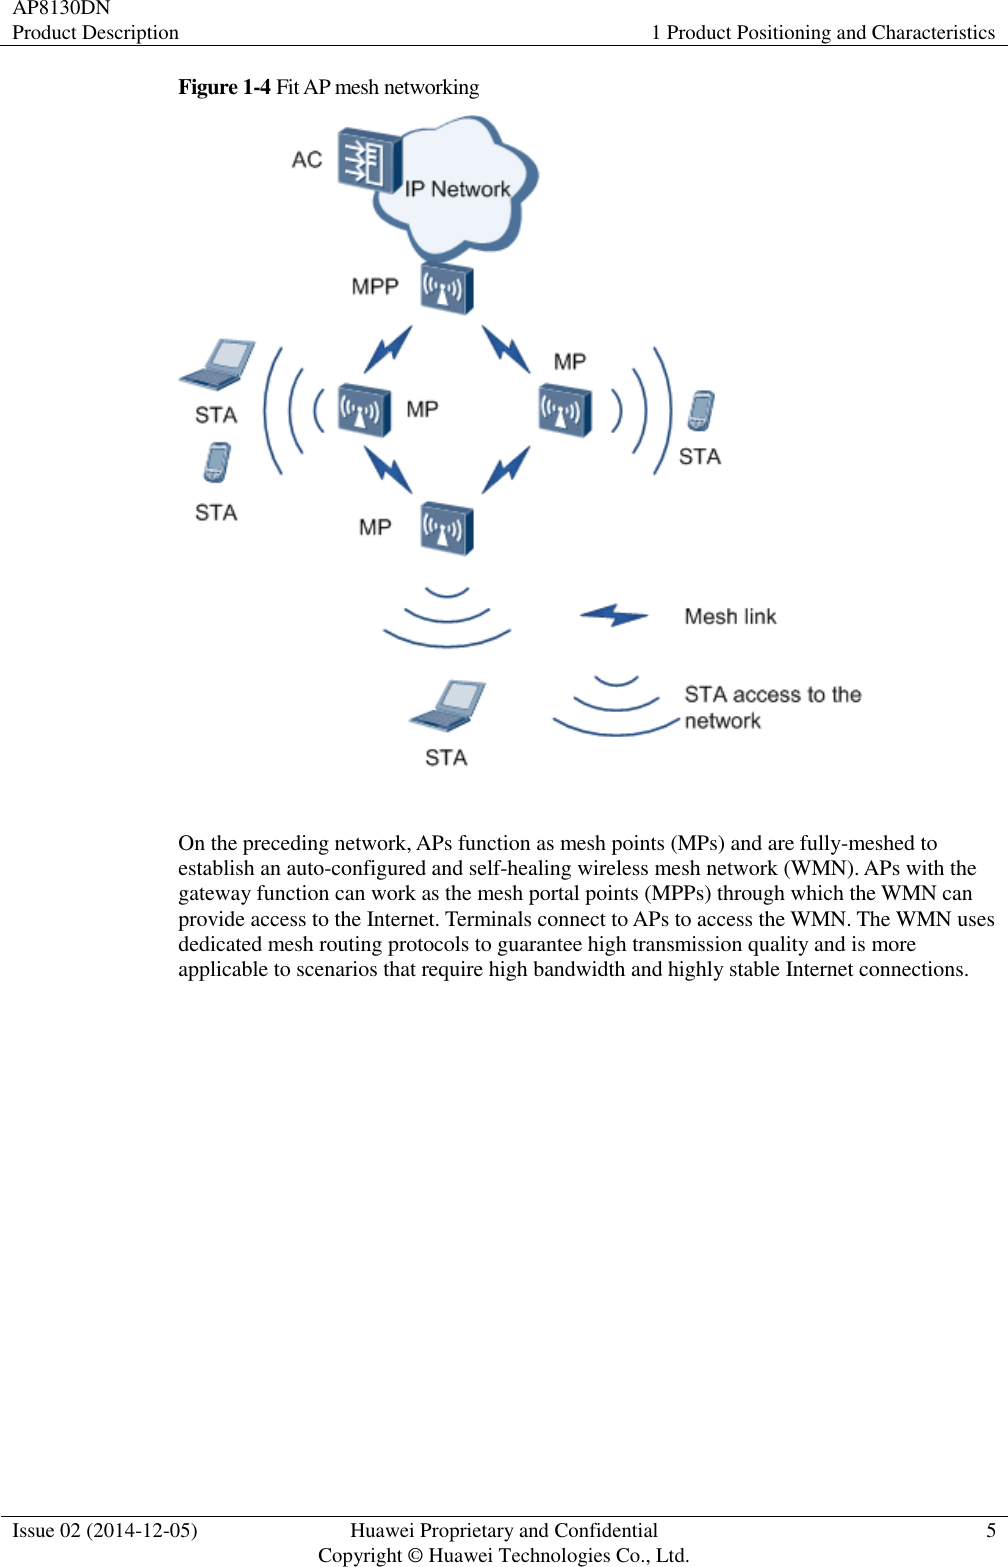 AP8130DN Product Description 1 Product Positioning and Characteristics  Issue 02 (2014-12-05) Huawei Proprietary and Confidential                                     Copyright © Huawei Technologies Co., Ltd. 5  Figure 1-4 Fit AP mesh networking   On the preceding network, APs function as mesh points (MPs) and are fully-meshed to establish an auto-configured and self-healing wireless mesh network (WMN). APs with the gateway function can work as the mesh portal points (MPPs) through which the WMN can provide access to the Internet. Terminals connect to APs to access the WMN. The WMN uses dedicated mesh routing protocols to guarantee high transmission quality and is more applicable to scenarios that require high bandwidth and highly stable Internet connections. 